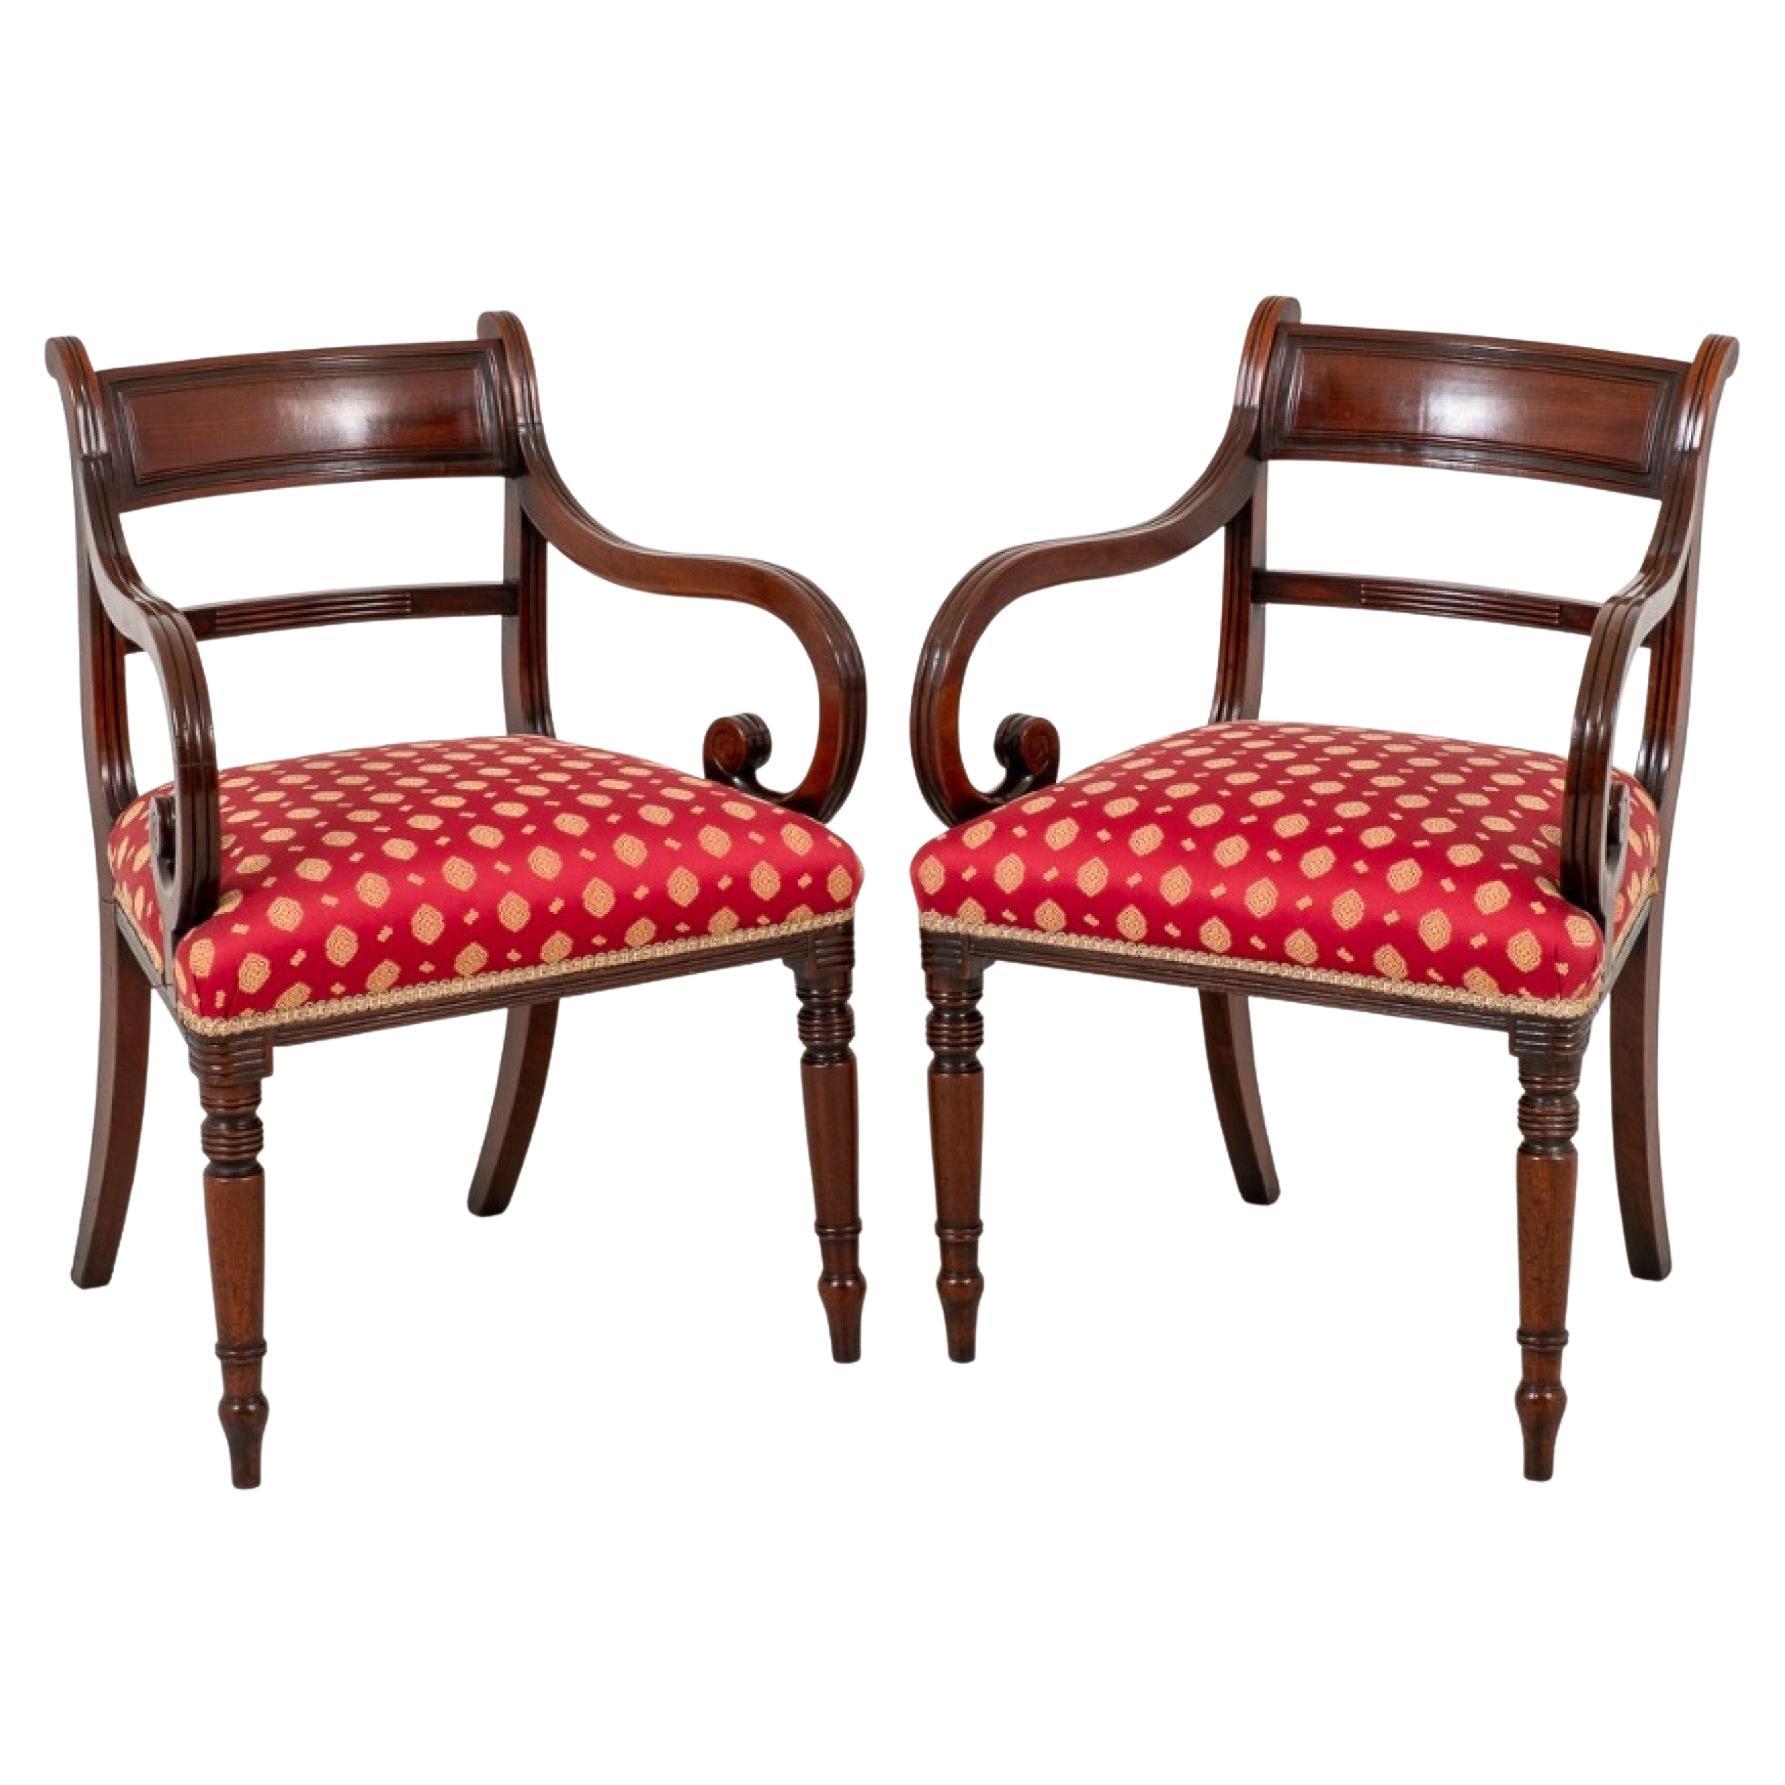 Pair Regency Arm Chairs, Antique Mahogany Open Chair